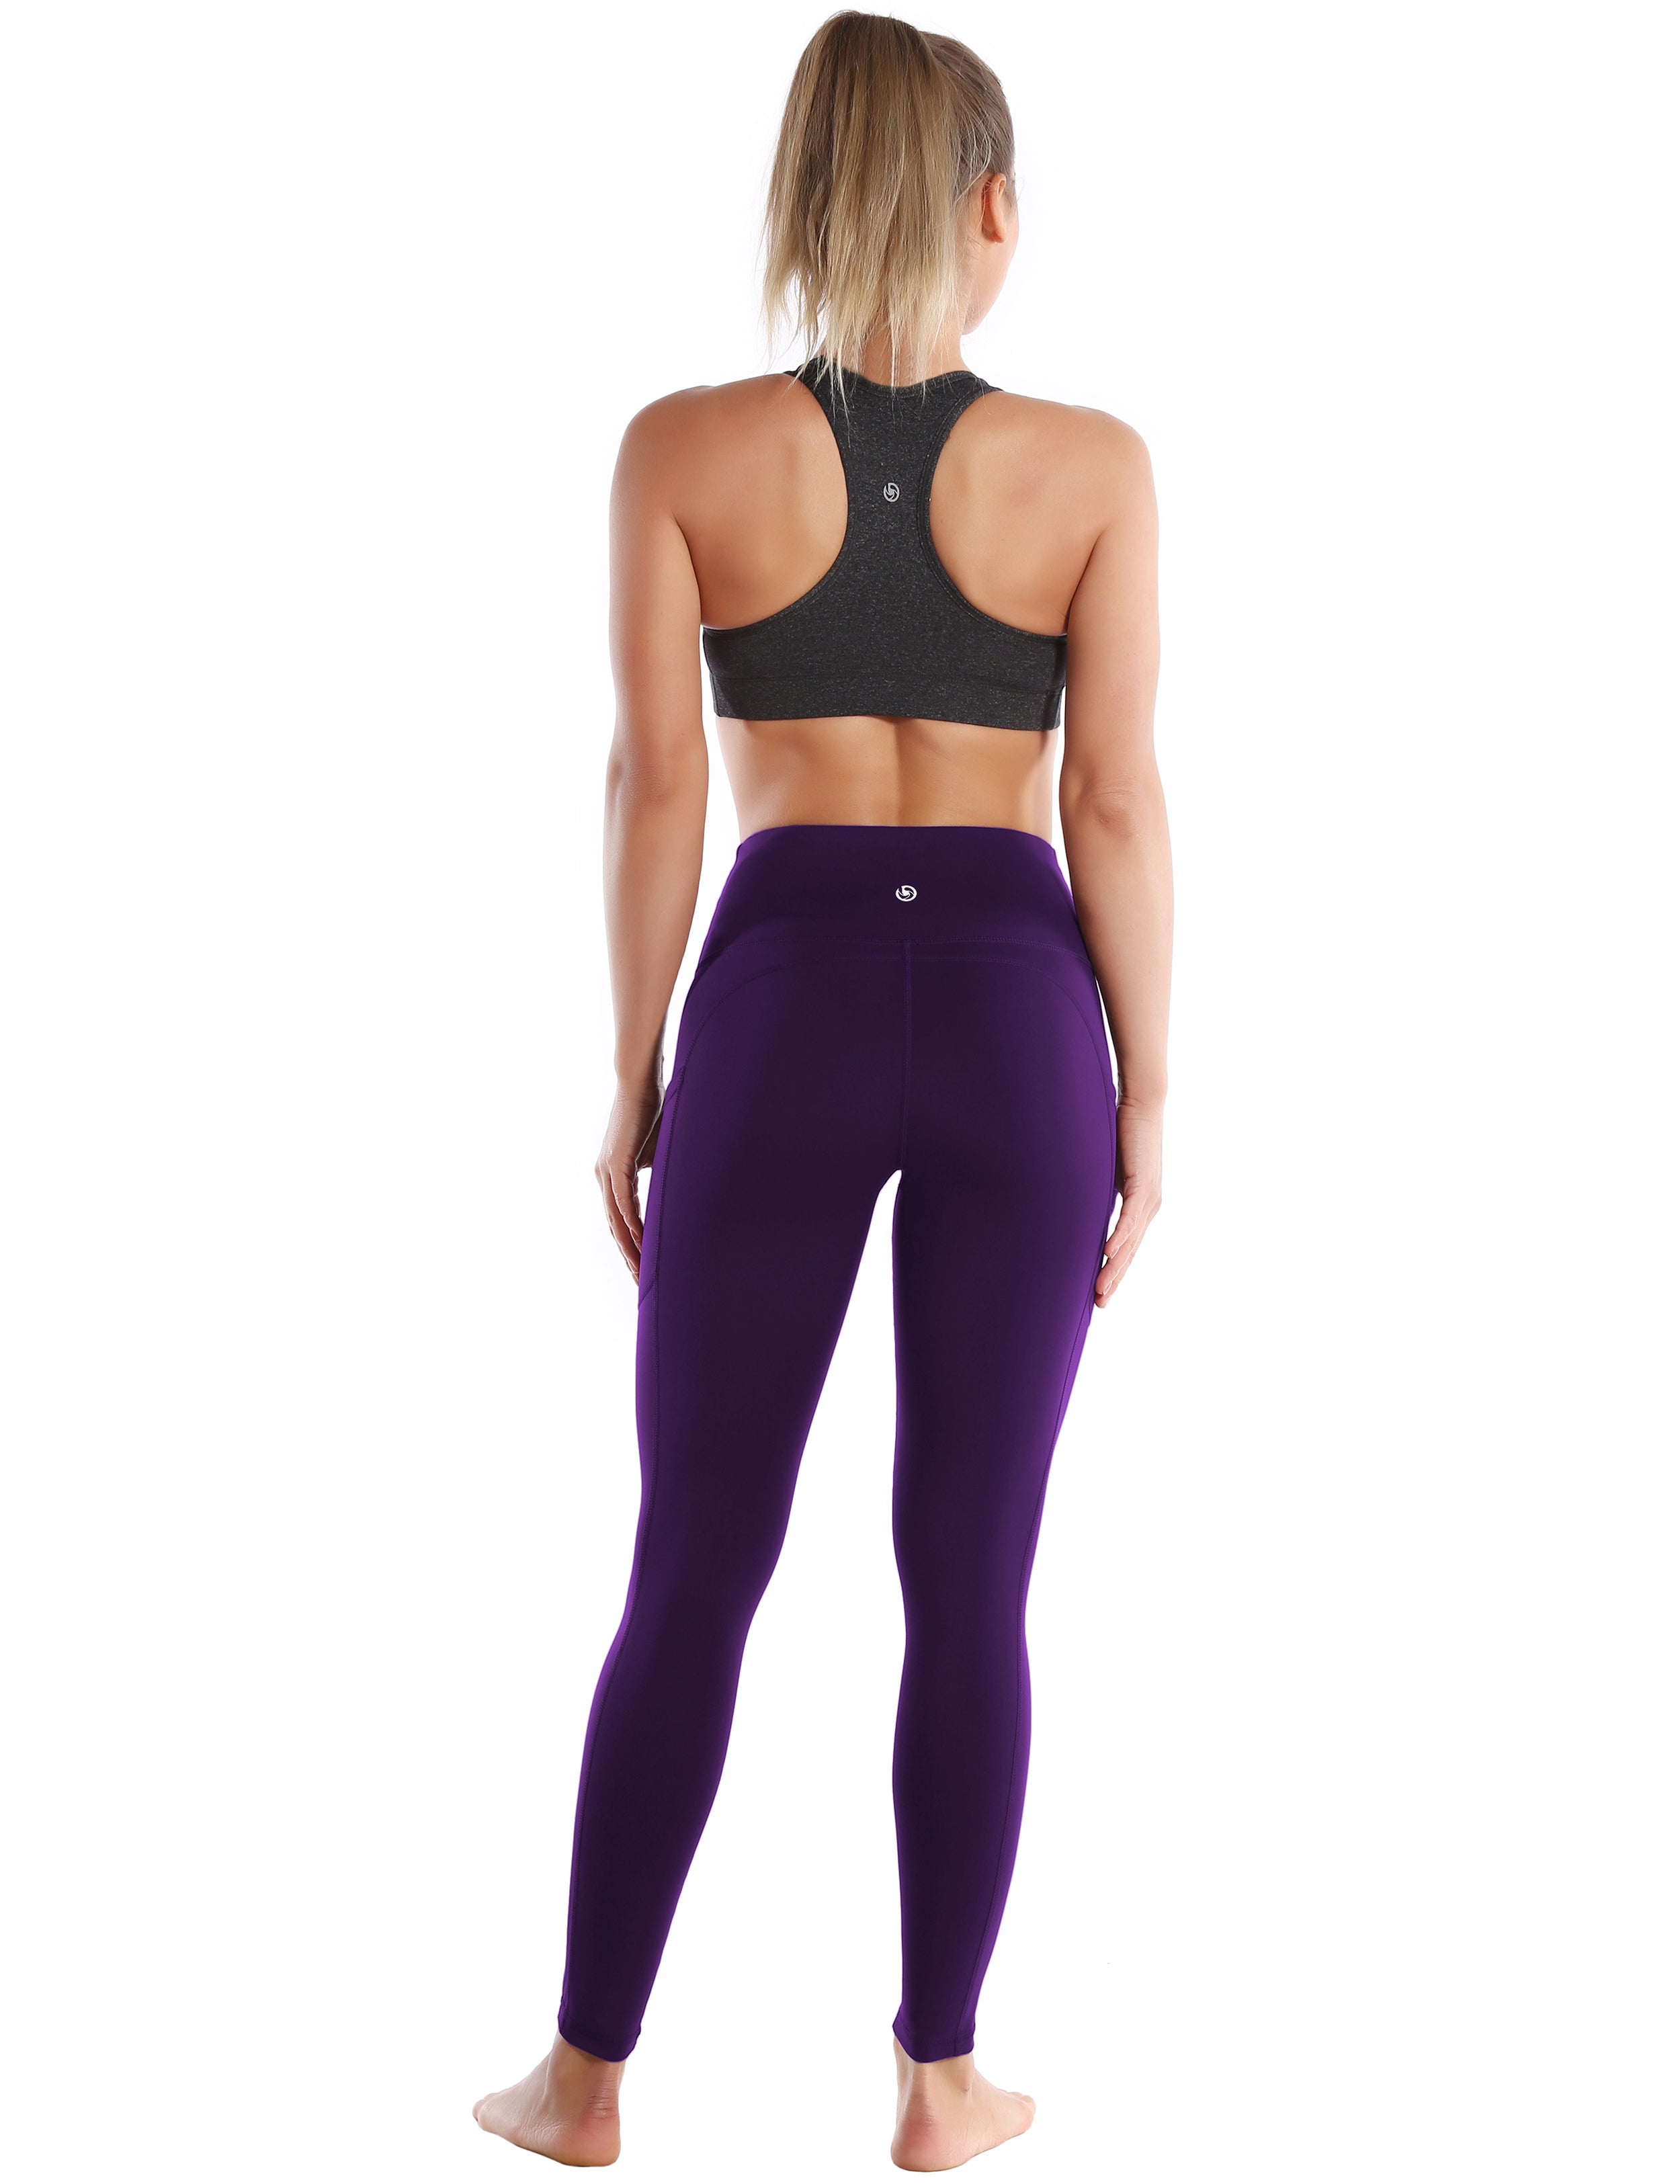 Hip Line Side Pockets Running Pants eggplantpurple Sexy Hip Line Side Pockets 75%Nylon/25%Spandex Fabric doesn't attract lint easily 4-way stretch No see-through Moisture-wicking Tummy control Inner pocket Two lengths